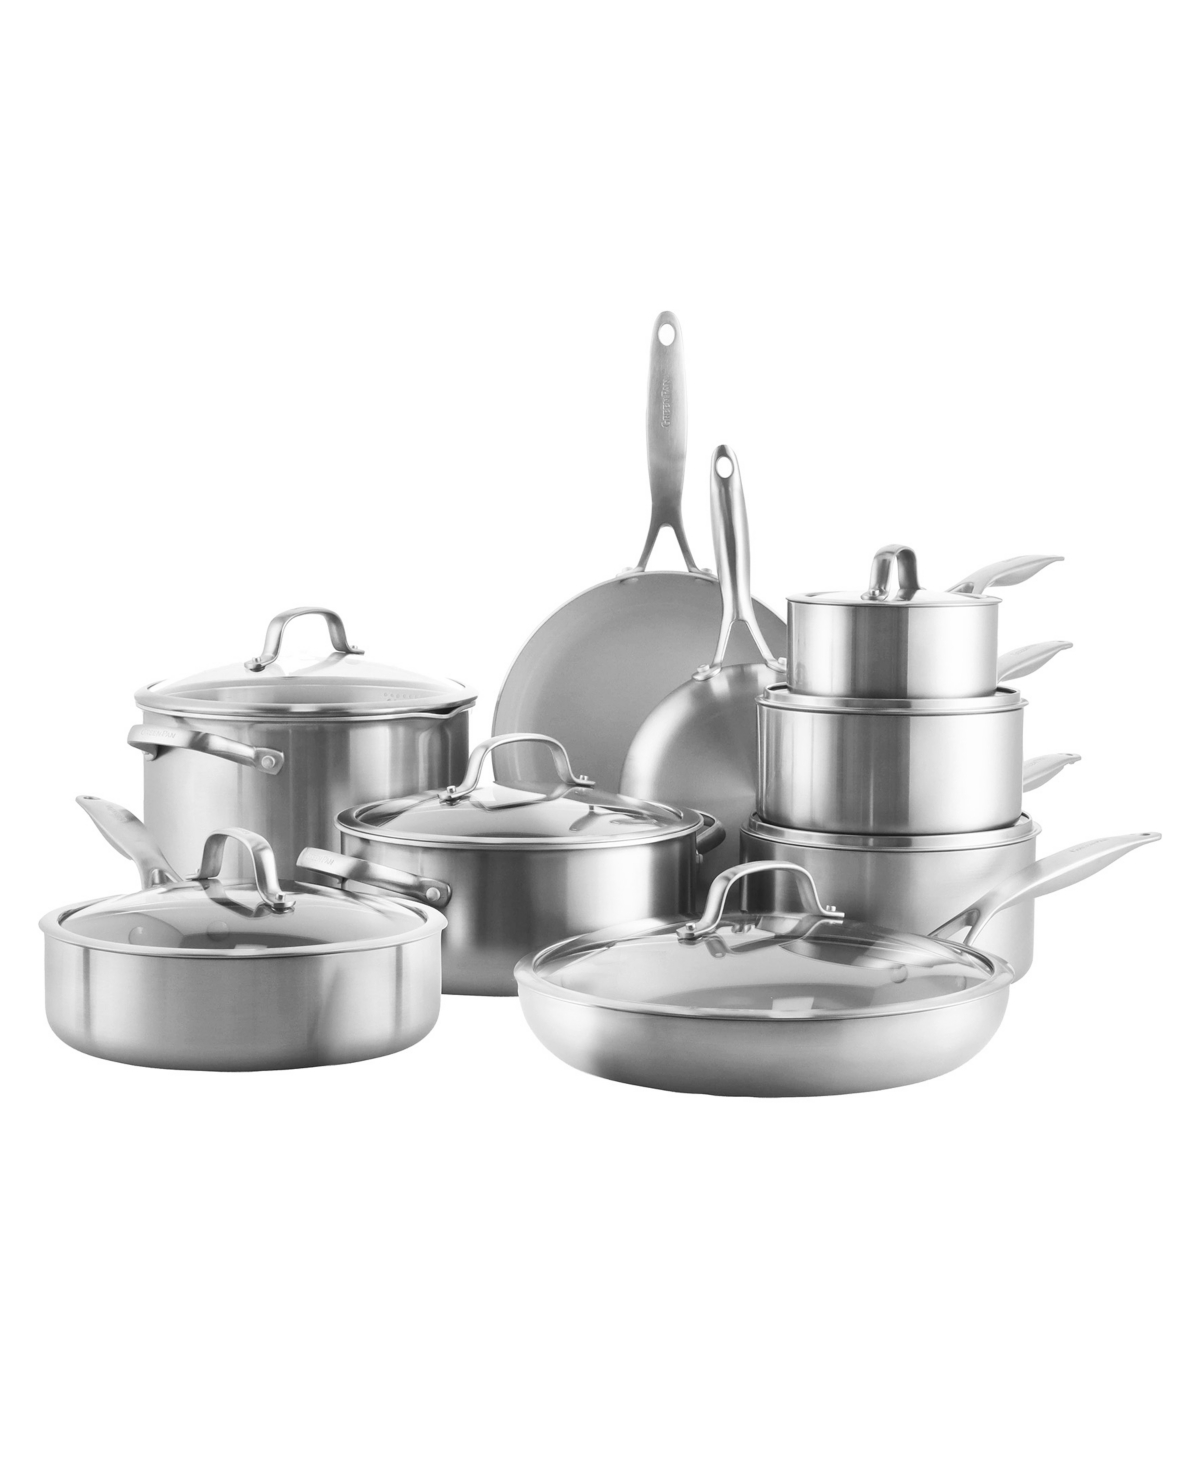 Shop Greenpan Venice Pro Tri-ply Stainless Steel Healthy Ceramic Nonstick 16 Piece Cookware Pots And Pans Set